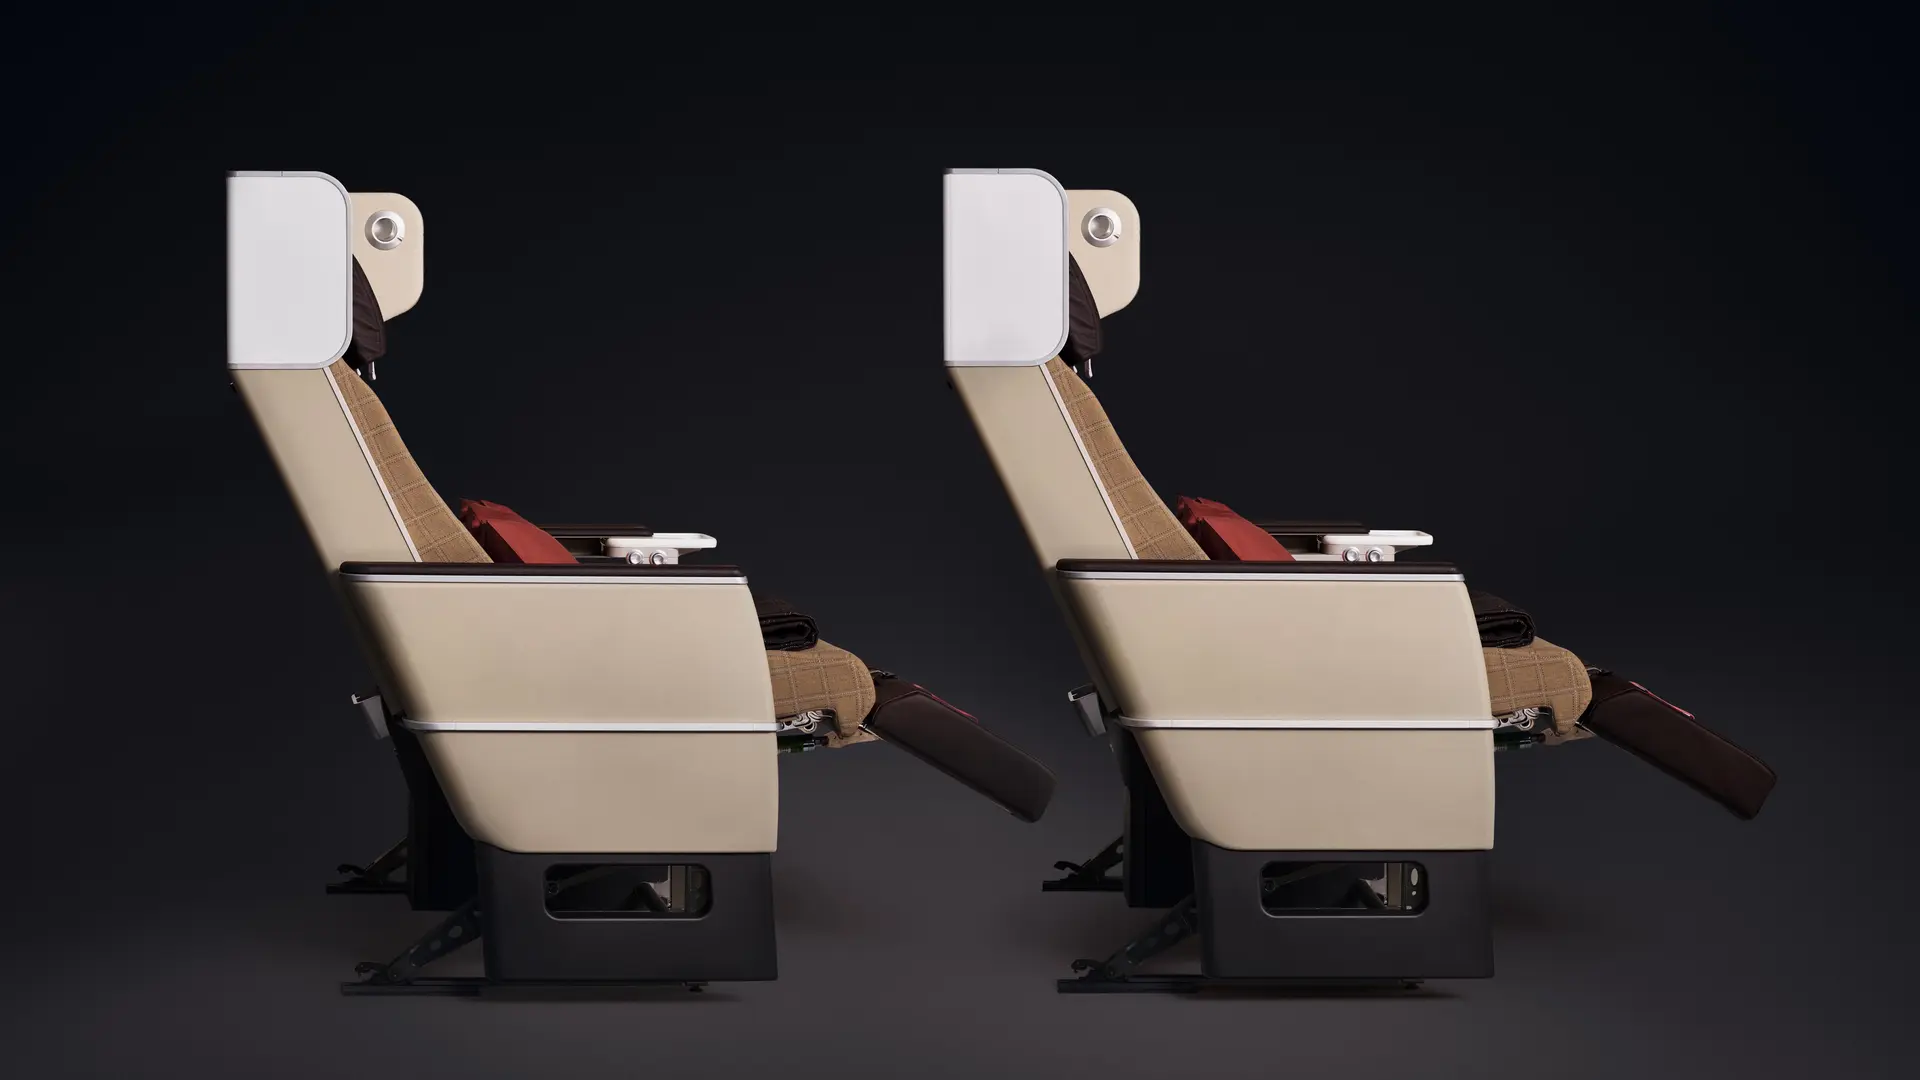 Airlines Articles - SWISS unveils its new Premium Economy Class